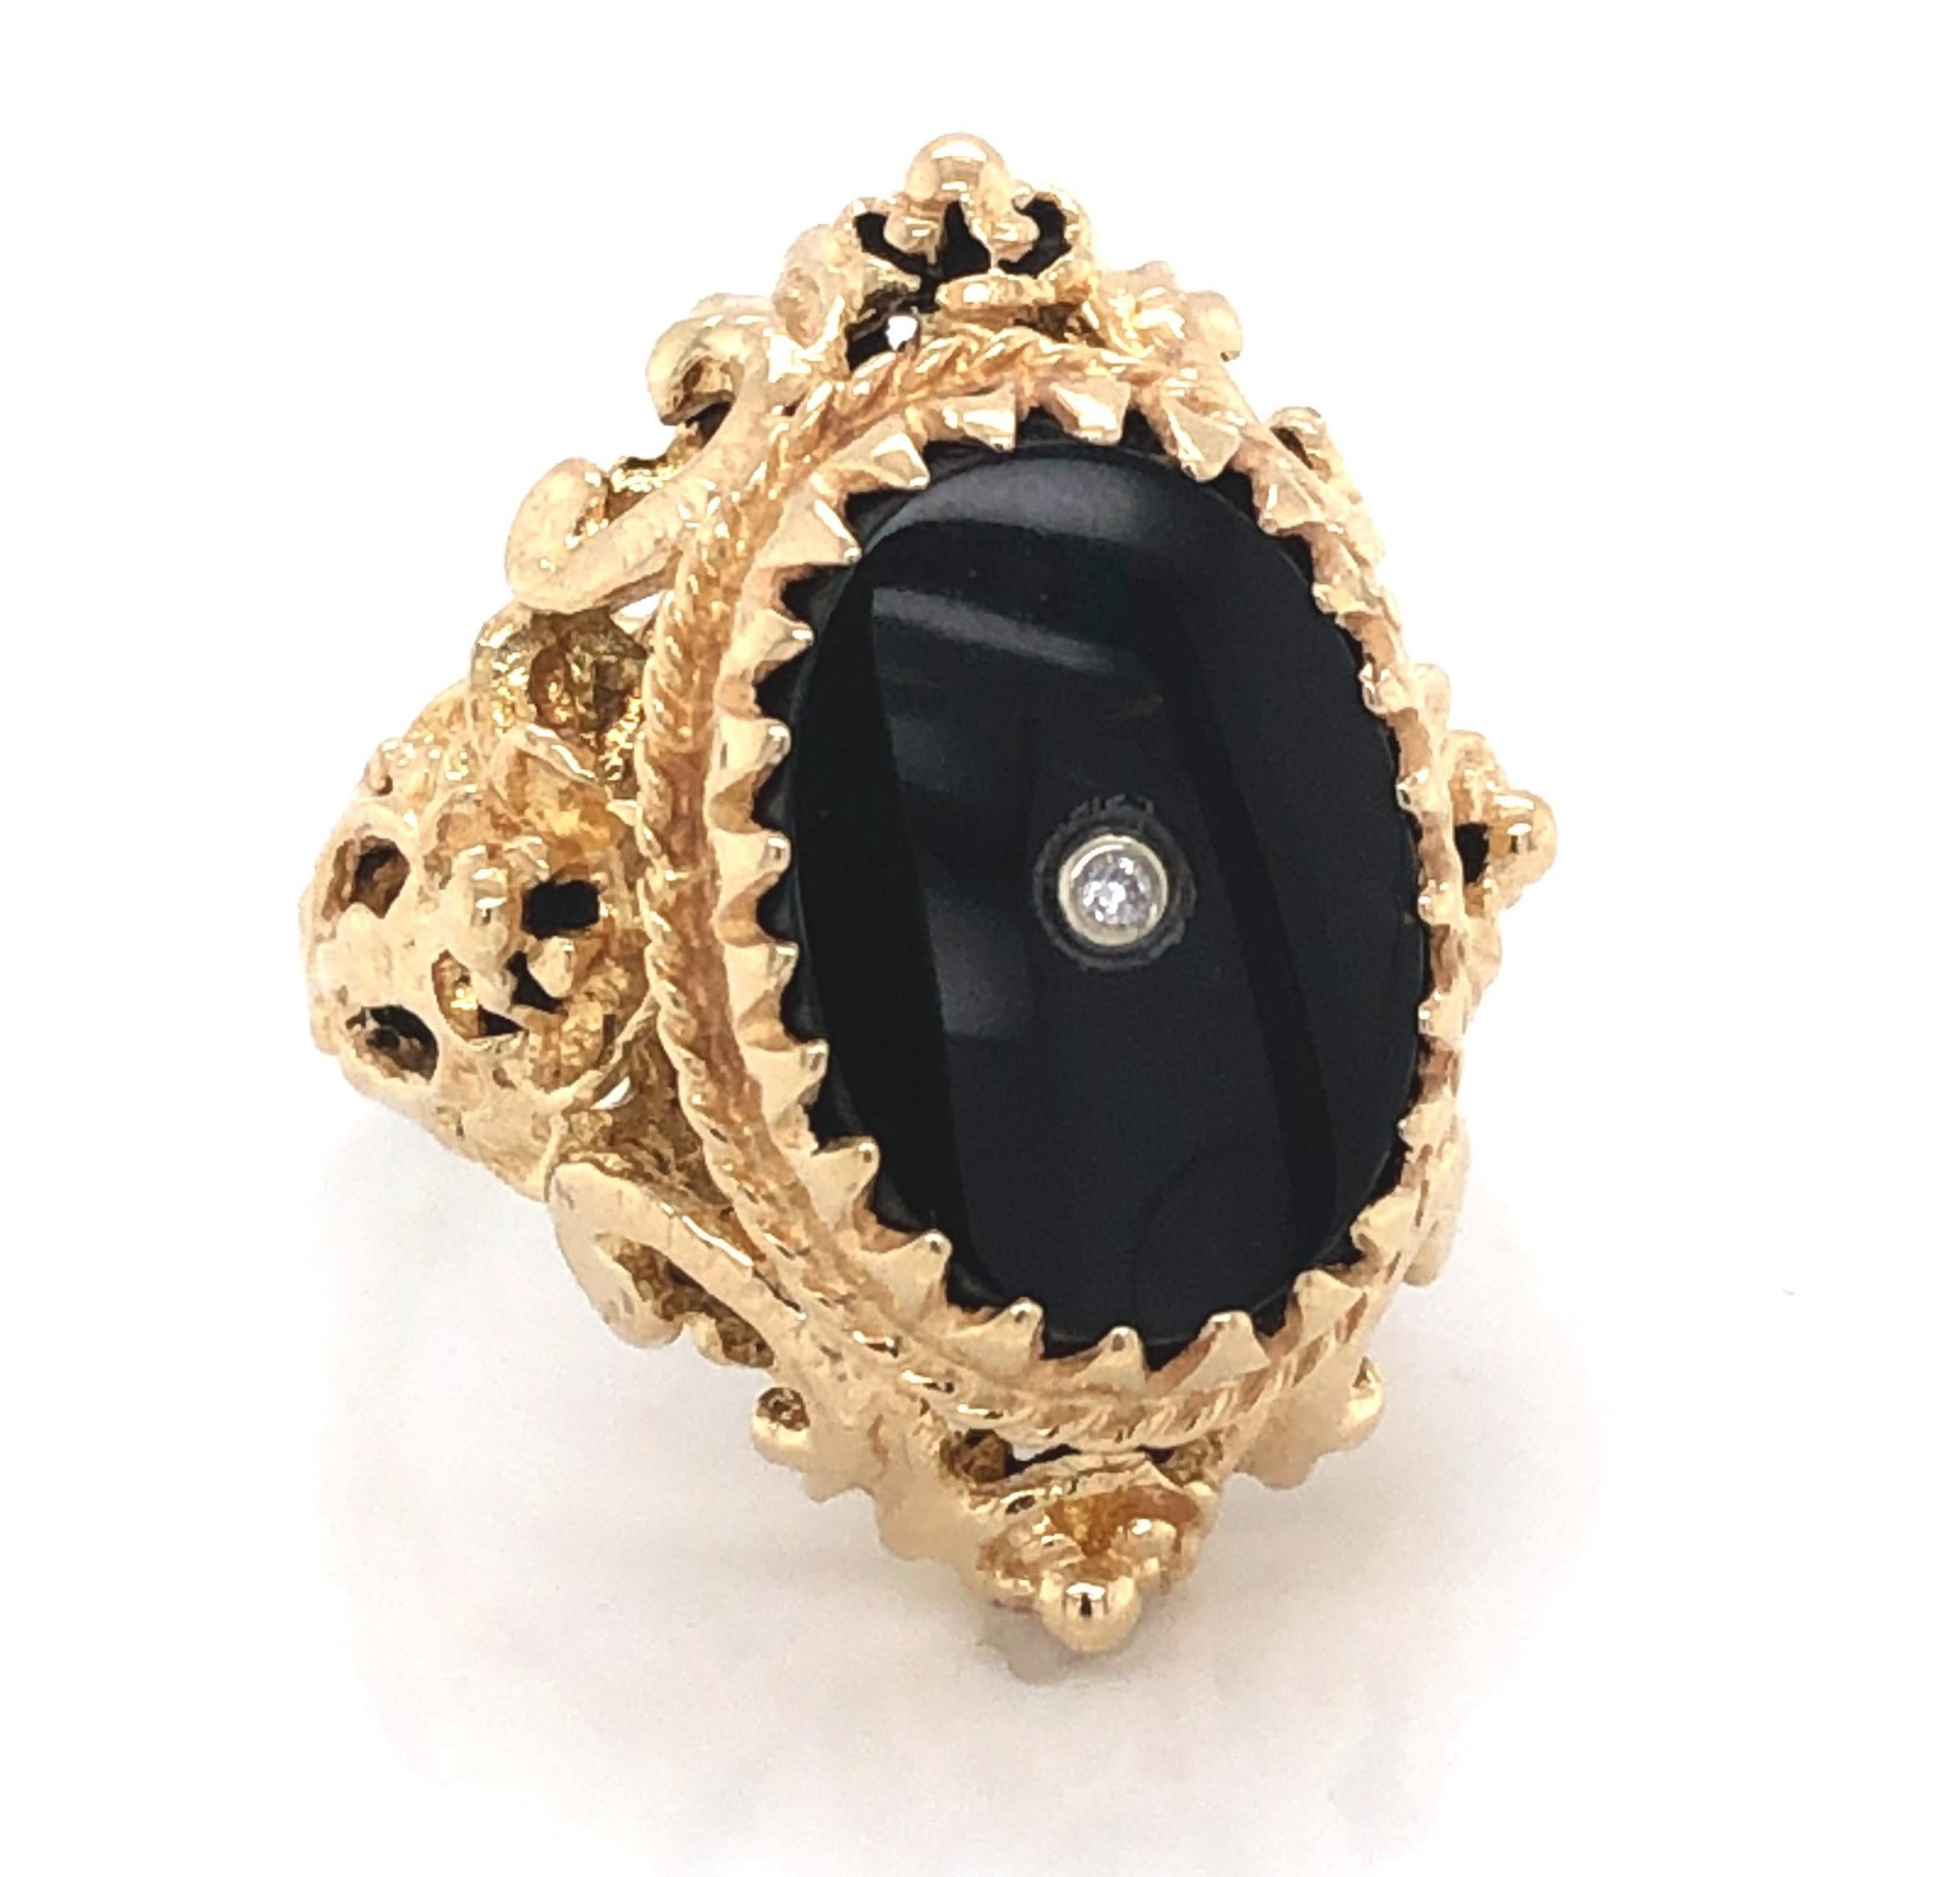 Admire this ornate Edwardian inspired ring setting created in fourteen karat 14k yellow gold that enhances the bold polished oval black onyx face with singular diamond accent. The ring measures approximately 1 inch x 5/8 inch with a depth of 3/8